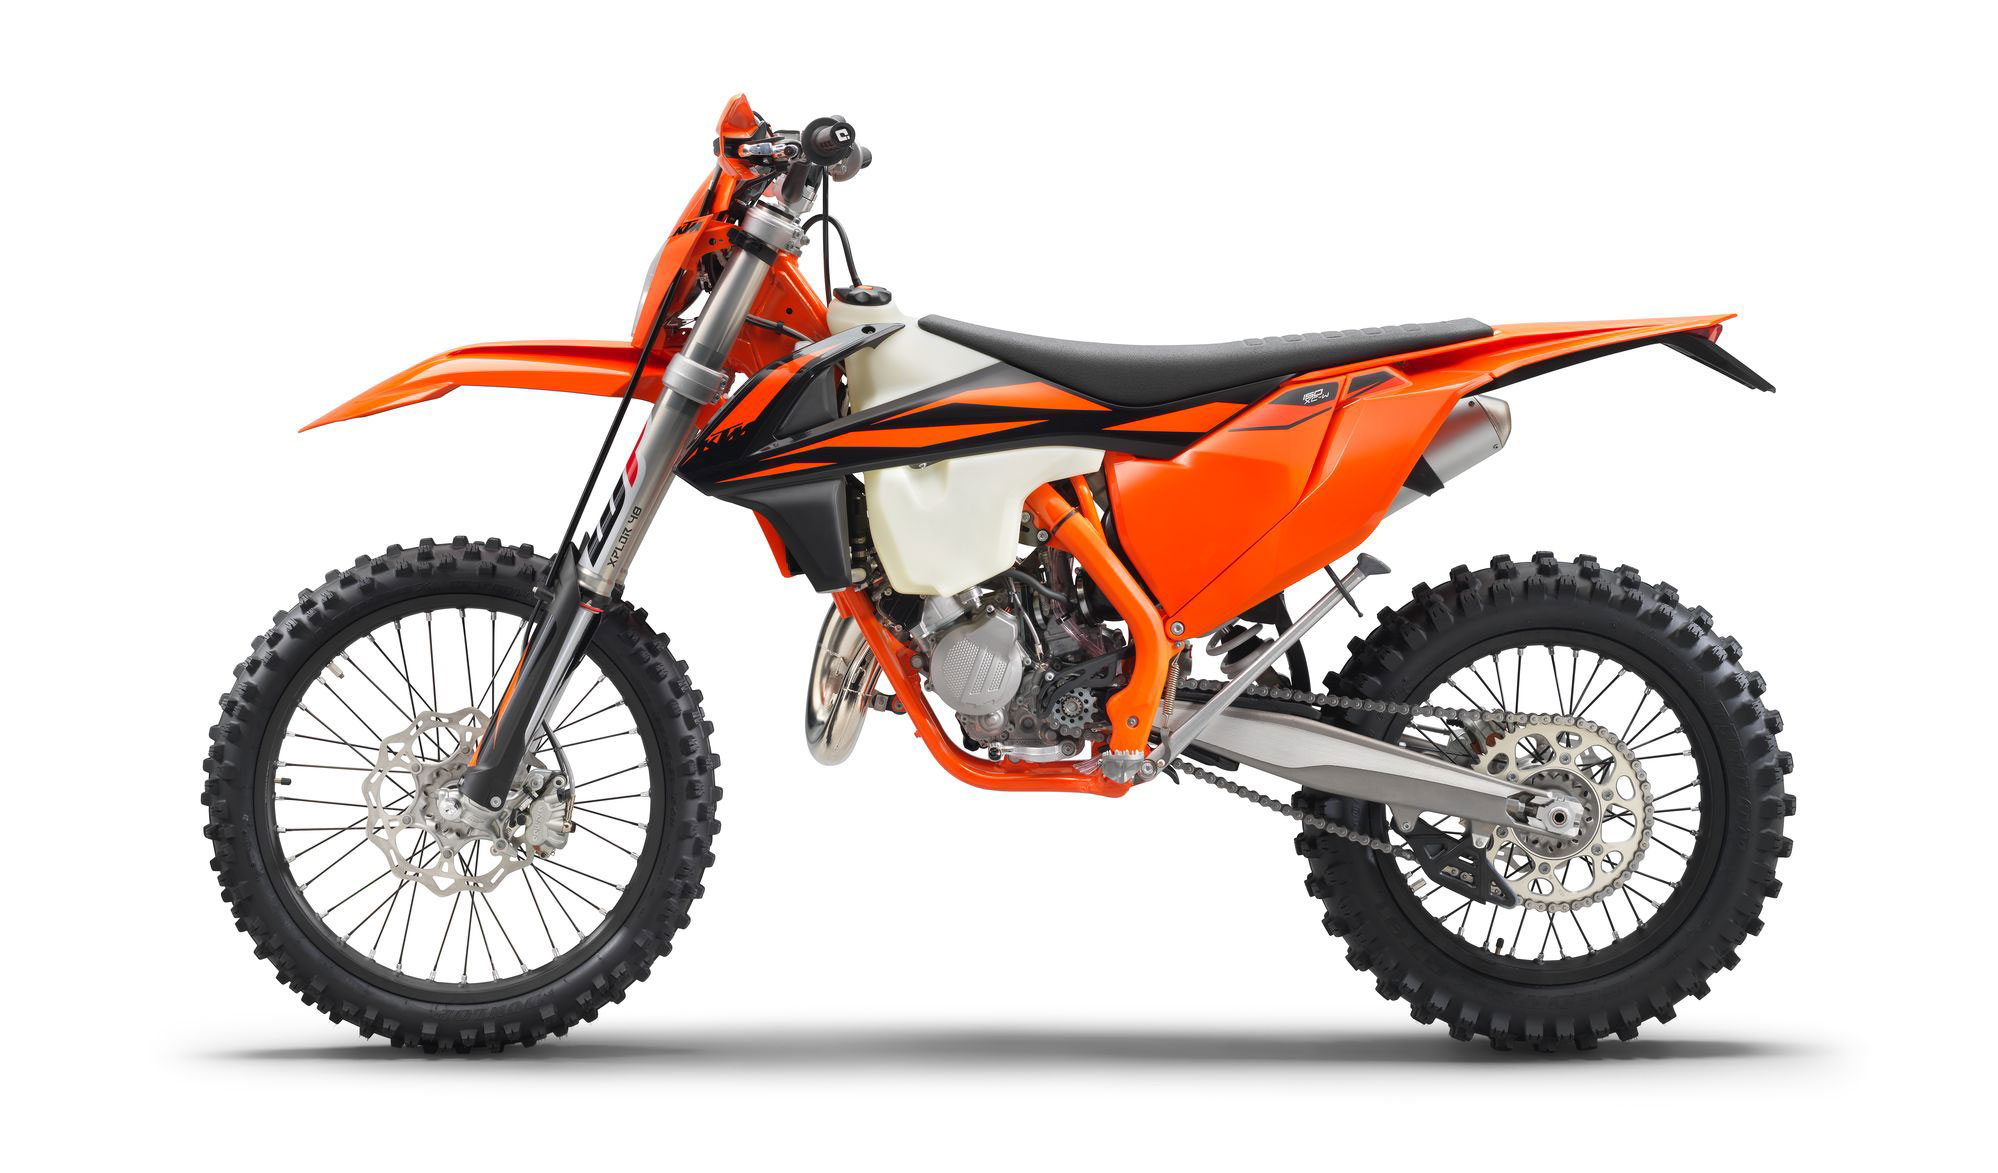 2019 KTM 150 XC-W Guide • Total Motorcycle